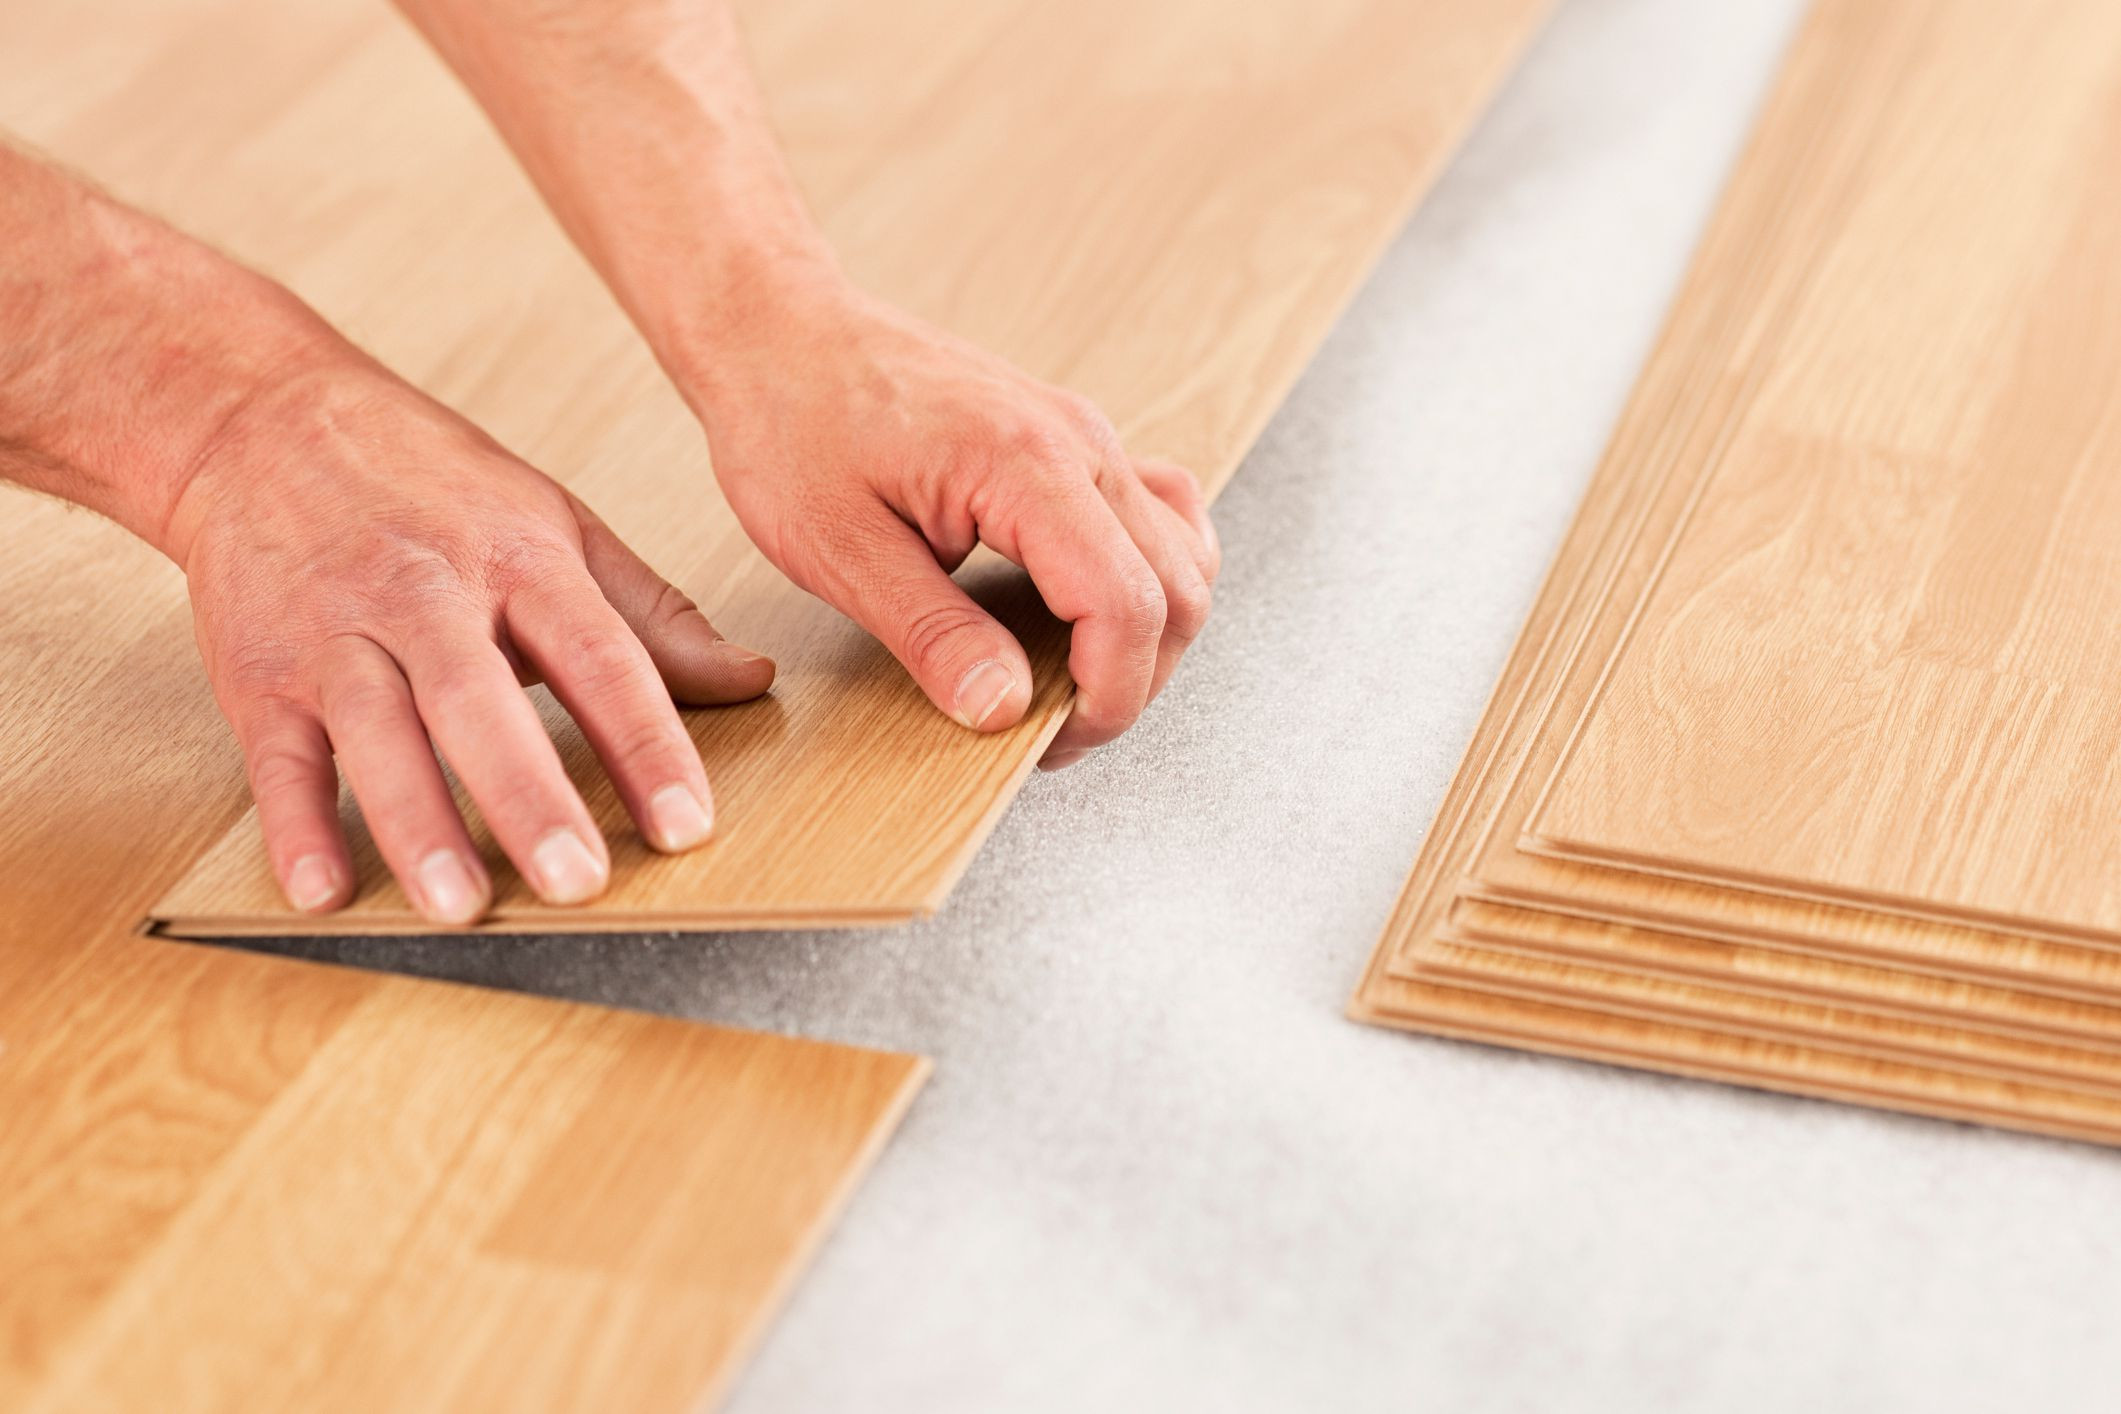 25 Stylish What tools are Needed to Install Hardwood Flooring 2024 free download what tools are needed to install hardwood flooring of laminate underlayment pros and cons within laminate floor install gettyimages 154961561 588816495f9b58bdb3da1a02